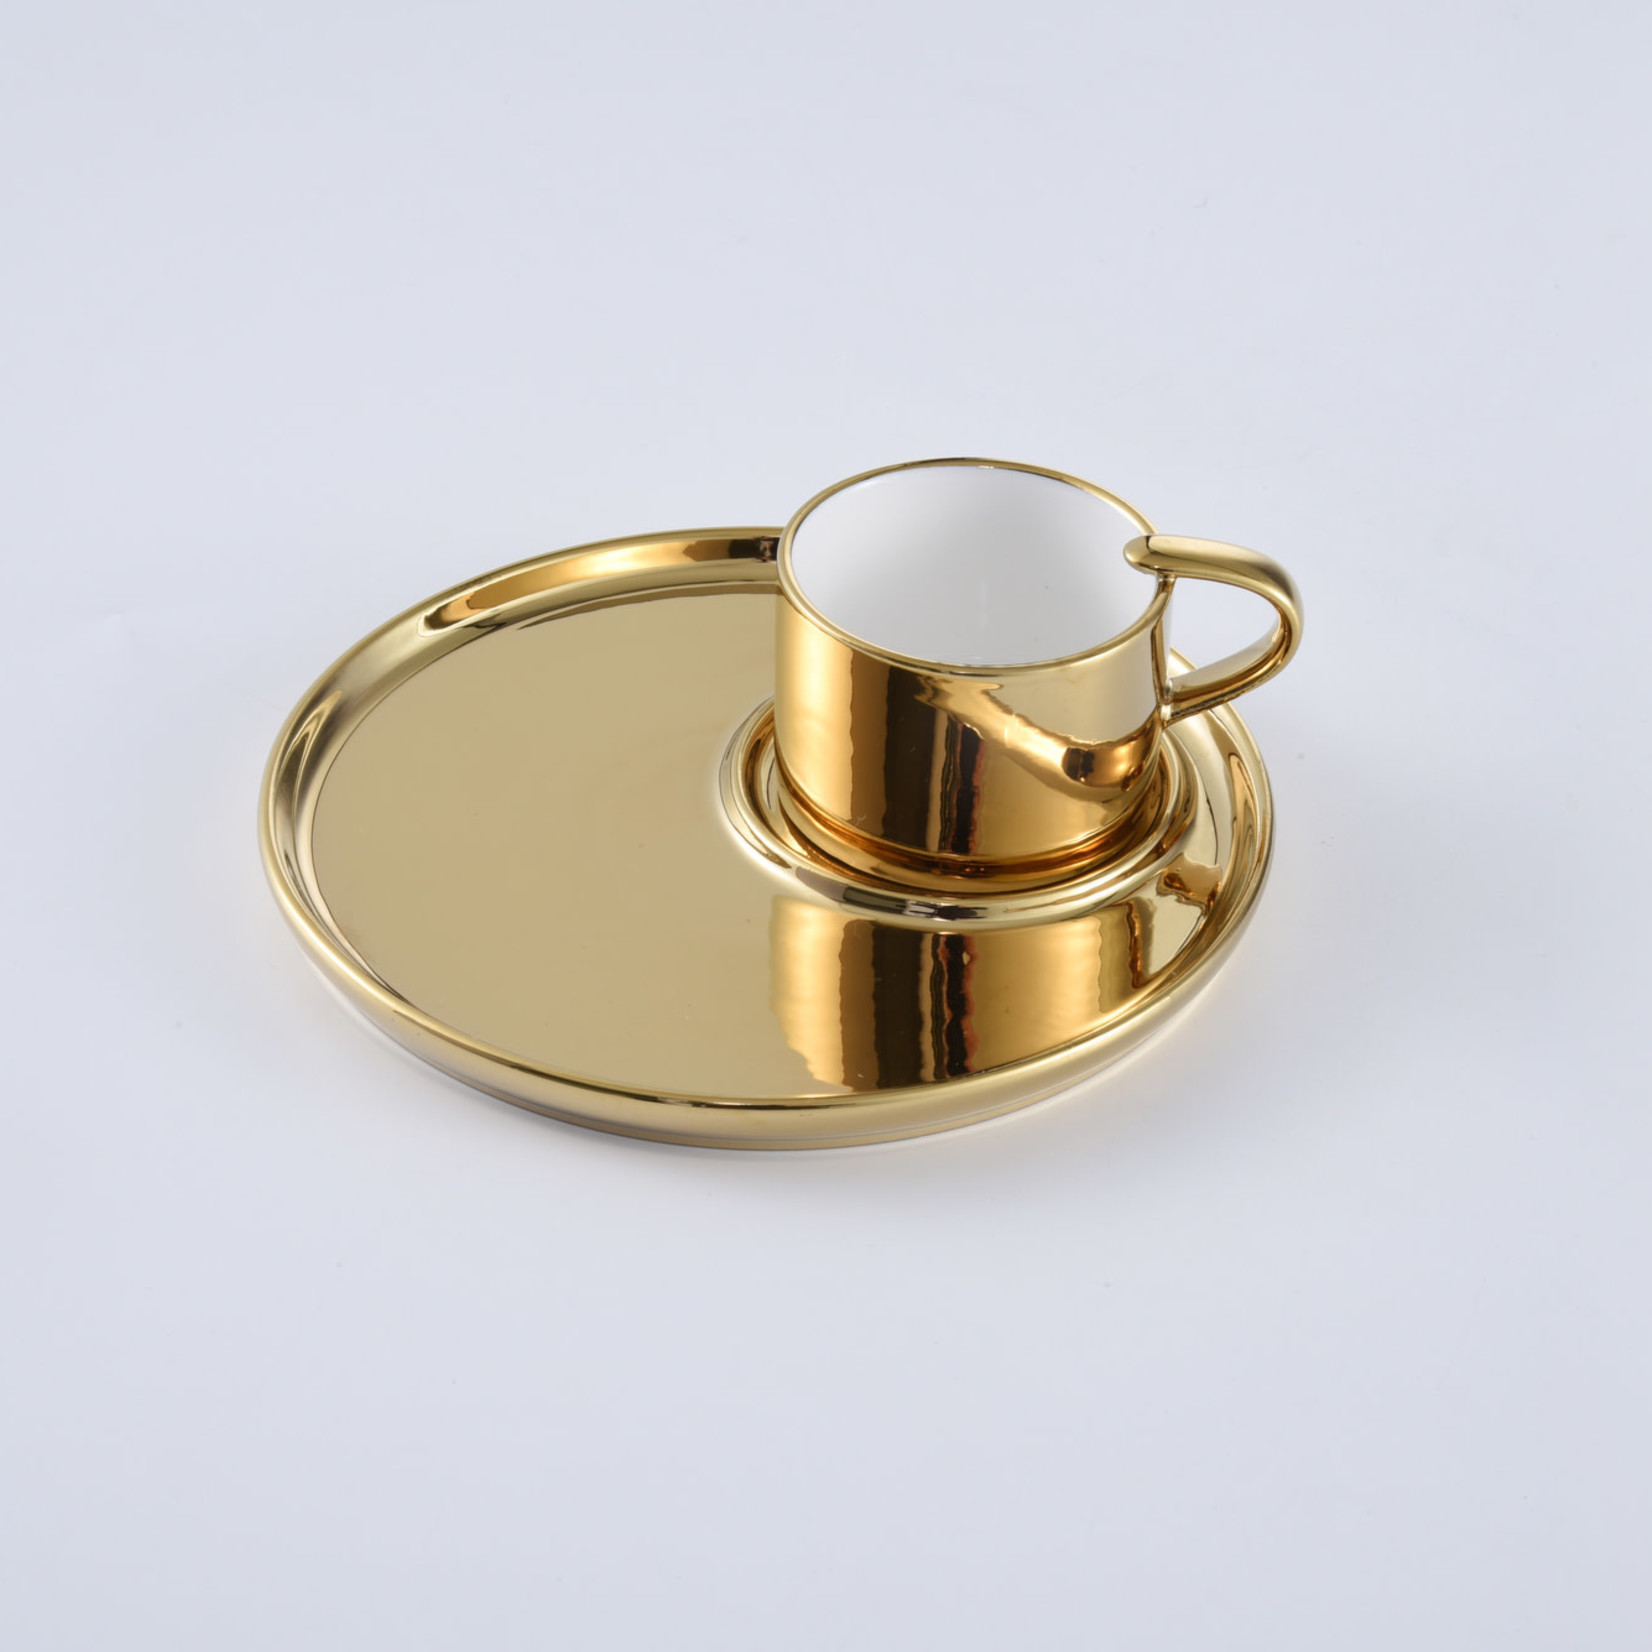 Pampa Bay Espresso Cup and Plate - Gold